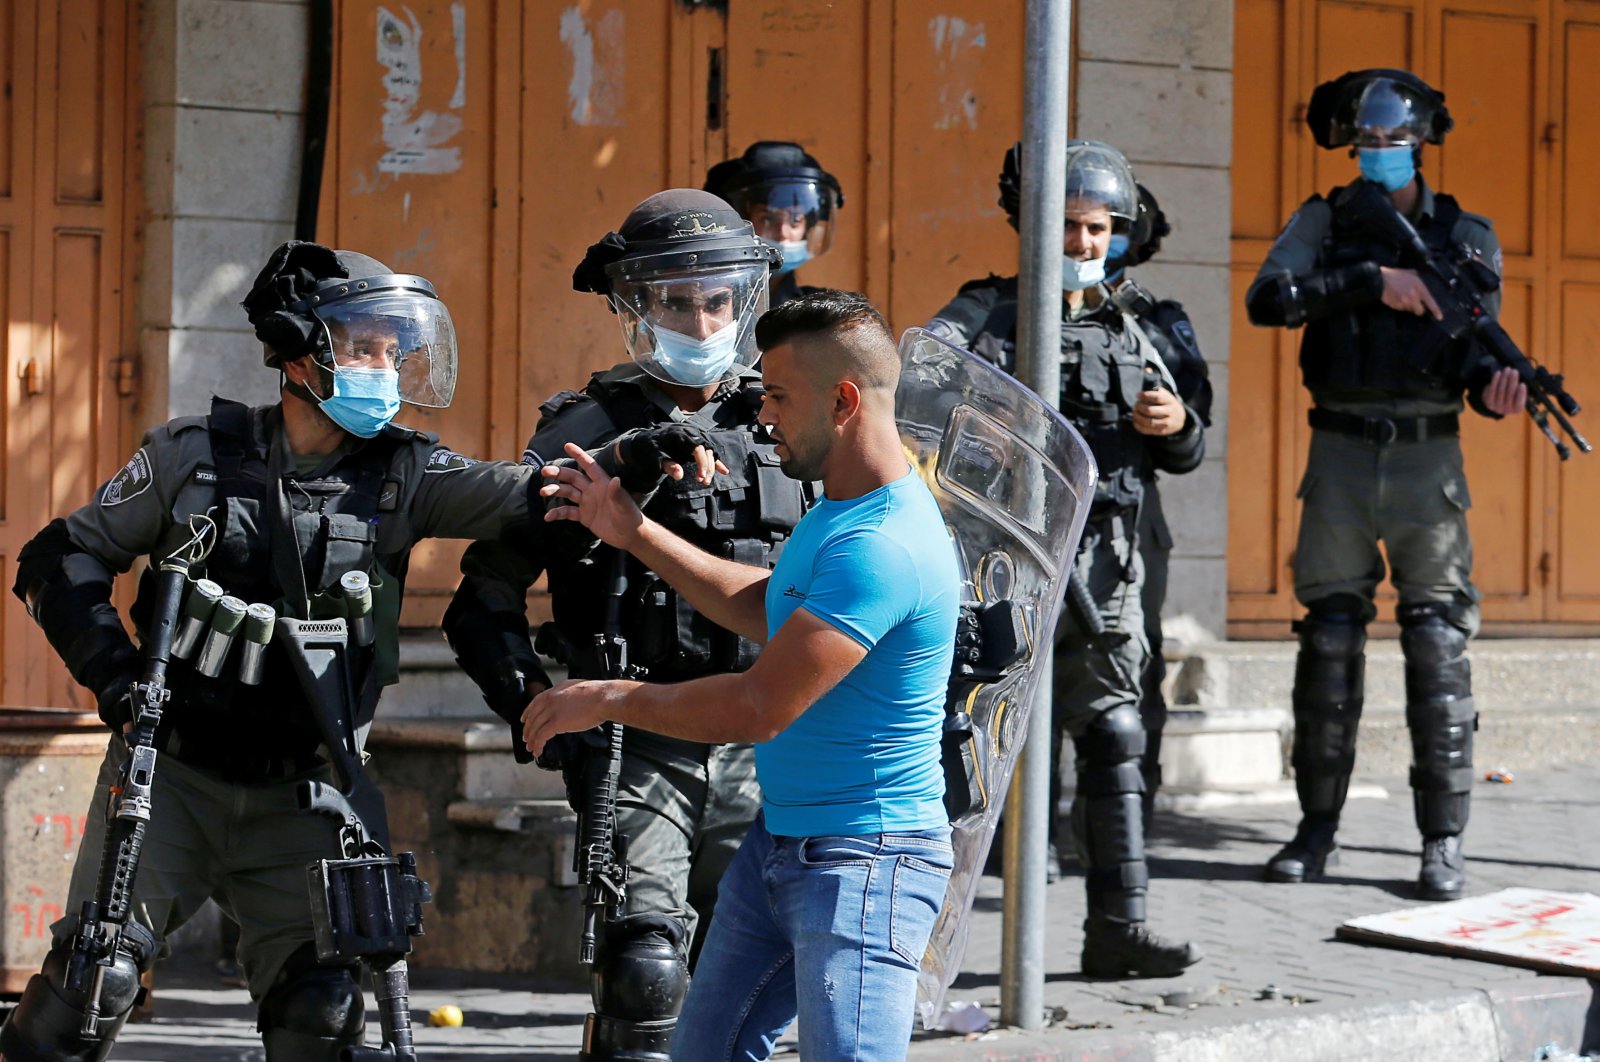 A Palestinian youth scuffles with an Israeli border police officer in the Israeli-occupied West Bank, Oct. 23, 2020. (REUTERS Photo)